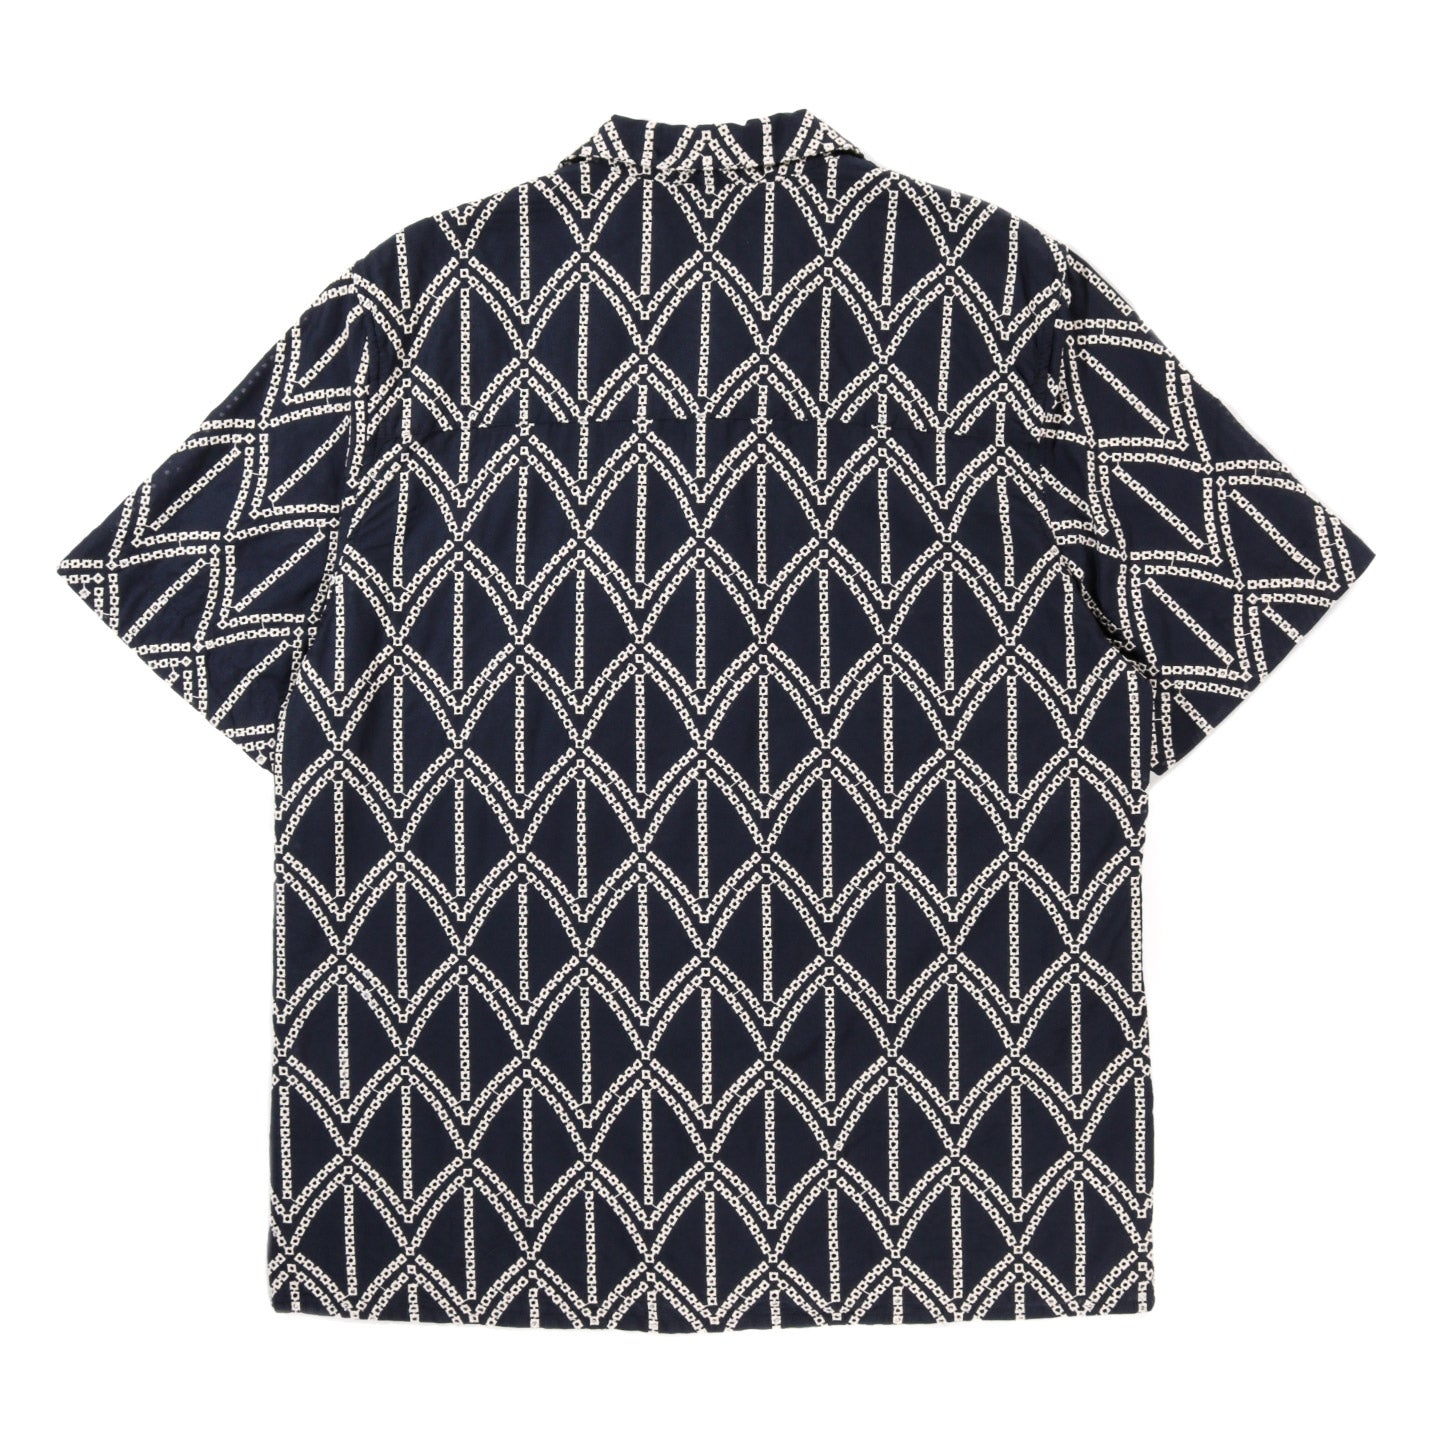 A KIND OF GUISE GIOIA SHIRT TRIANGLE OF SUMMER